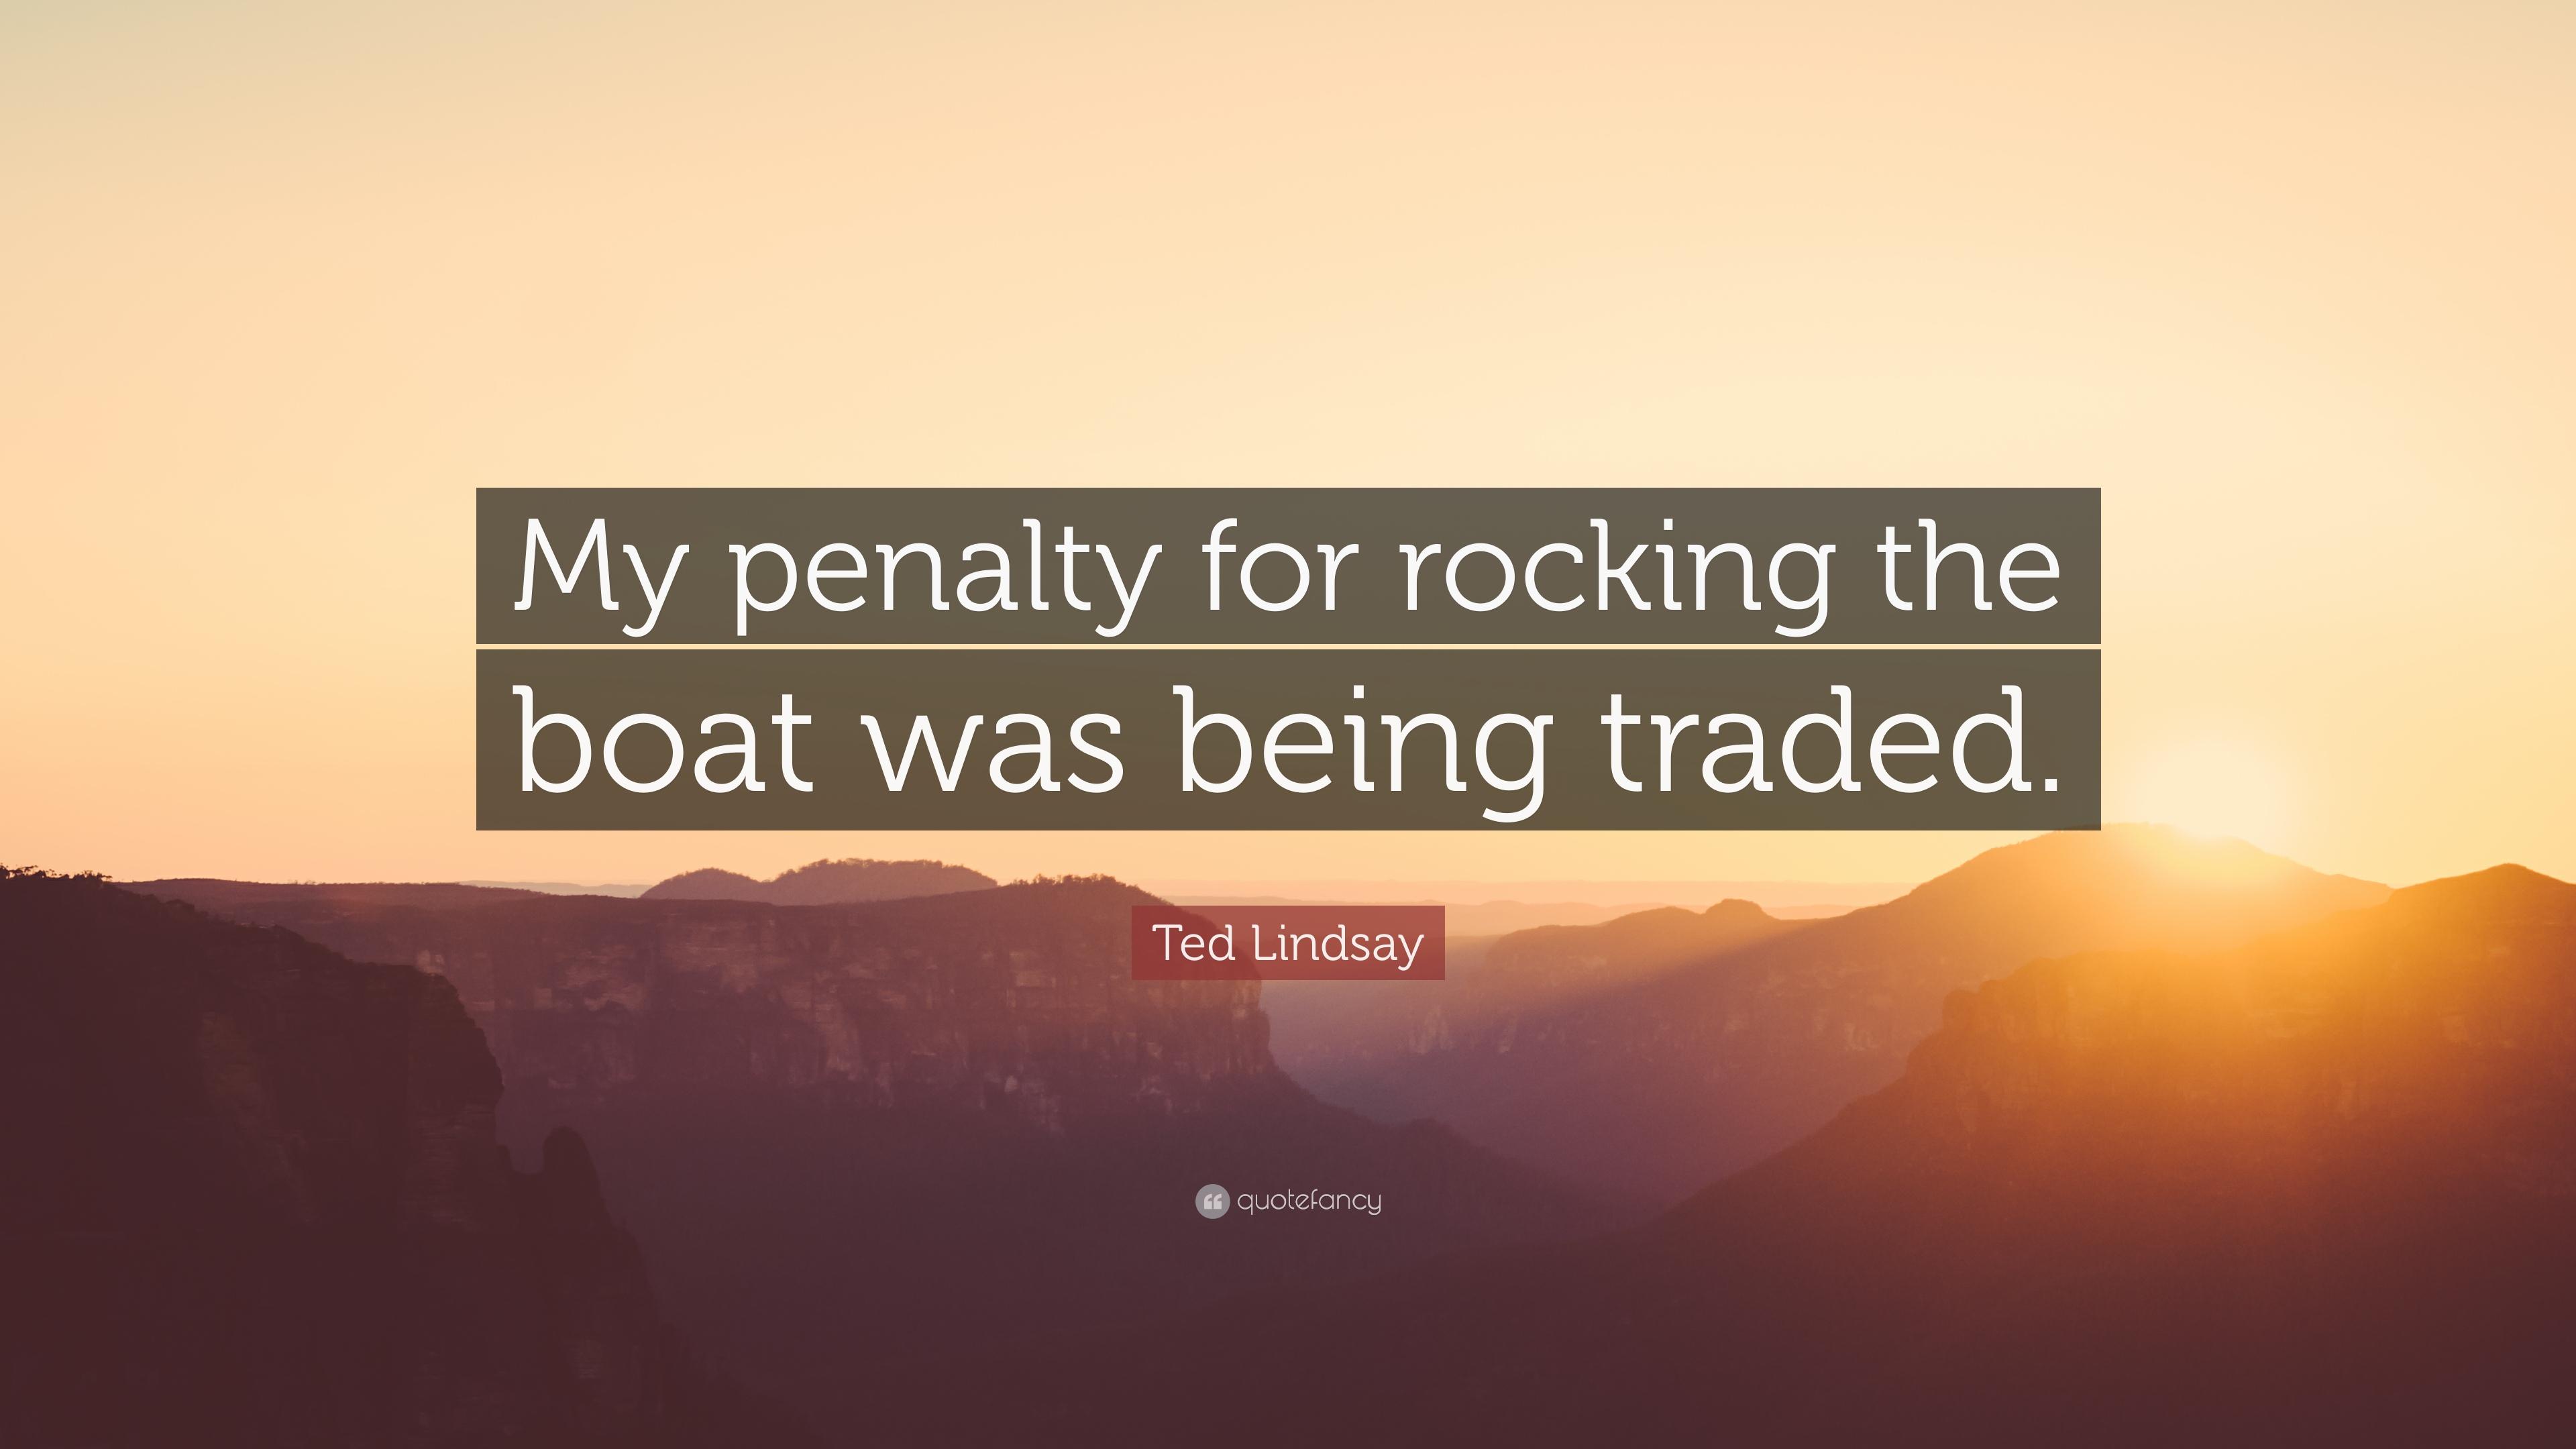 Ted Lindsay Quote: “My penalty for rocking the boat was being traded